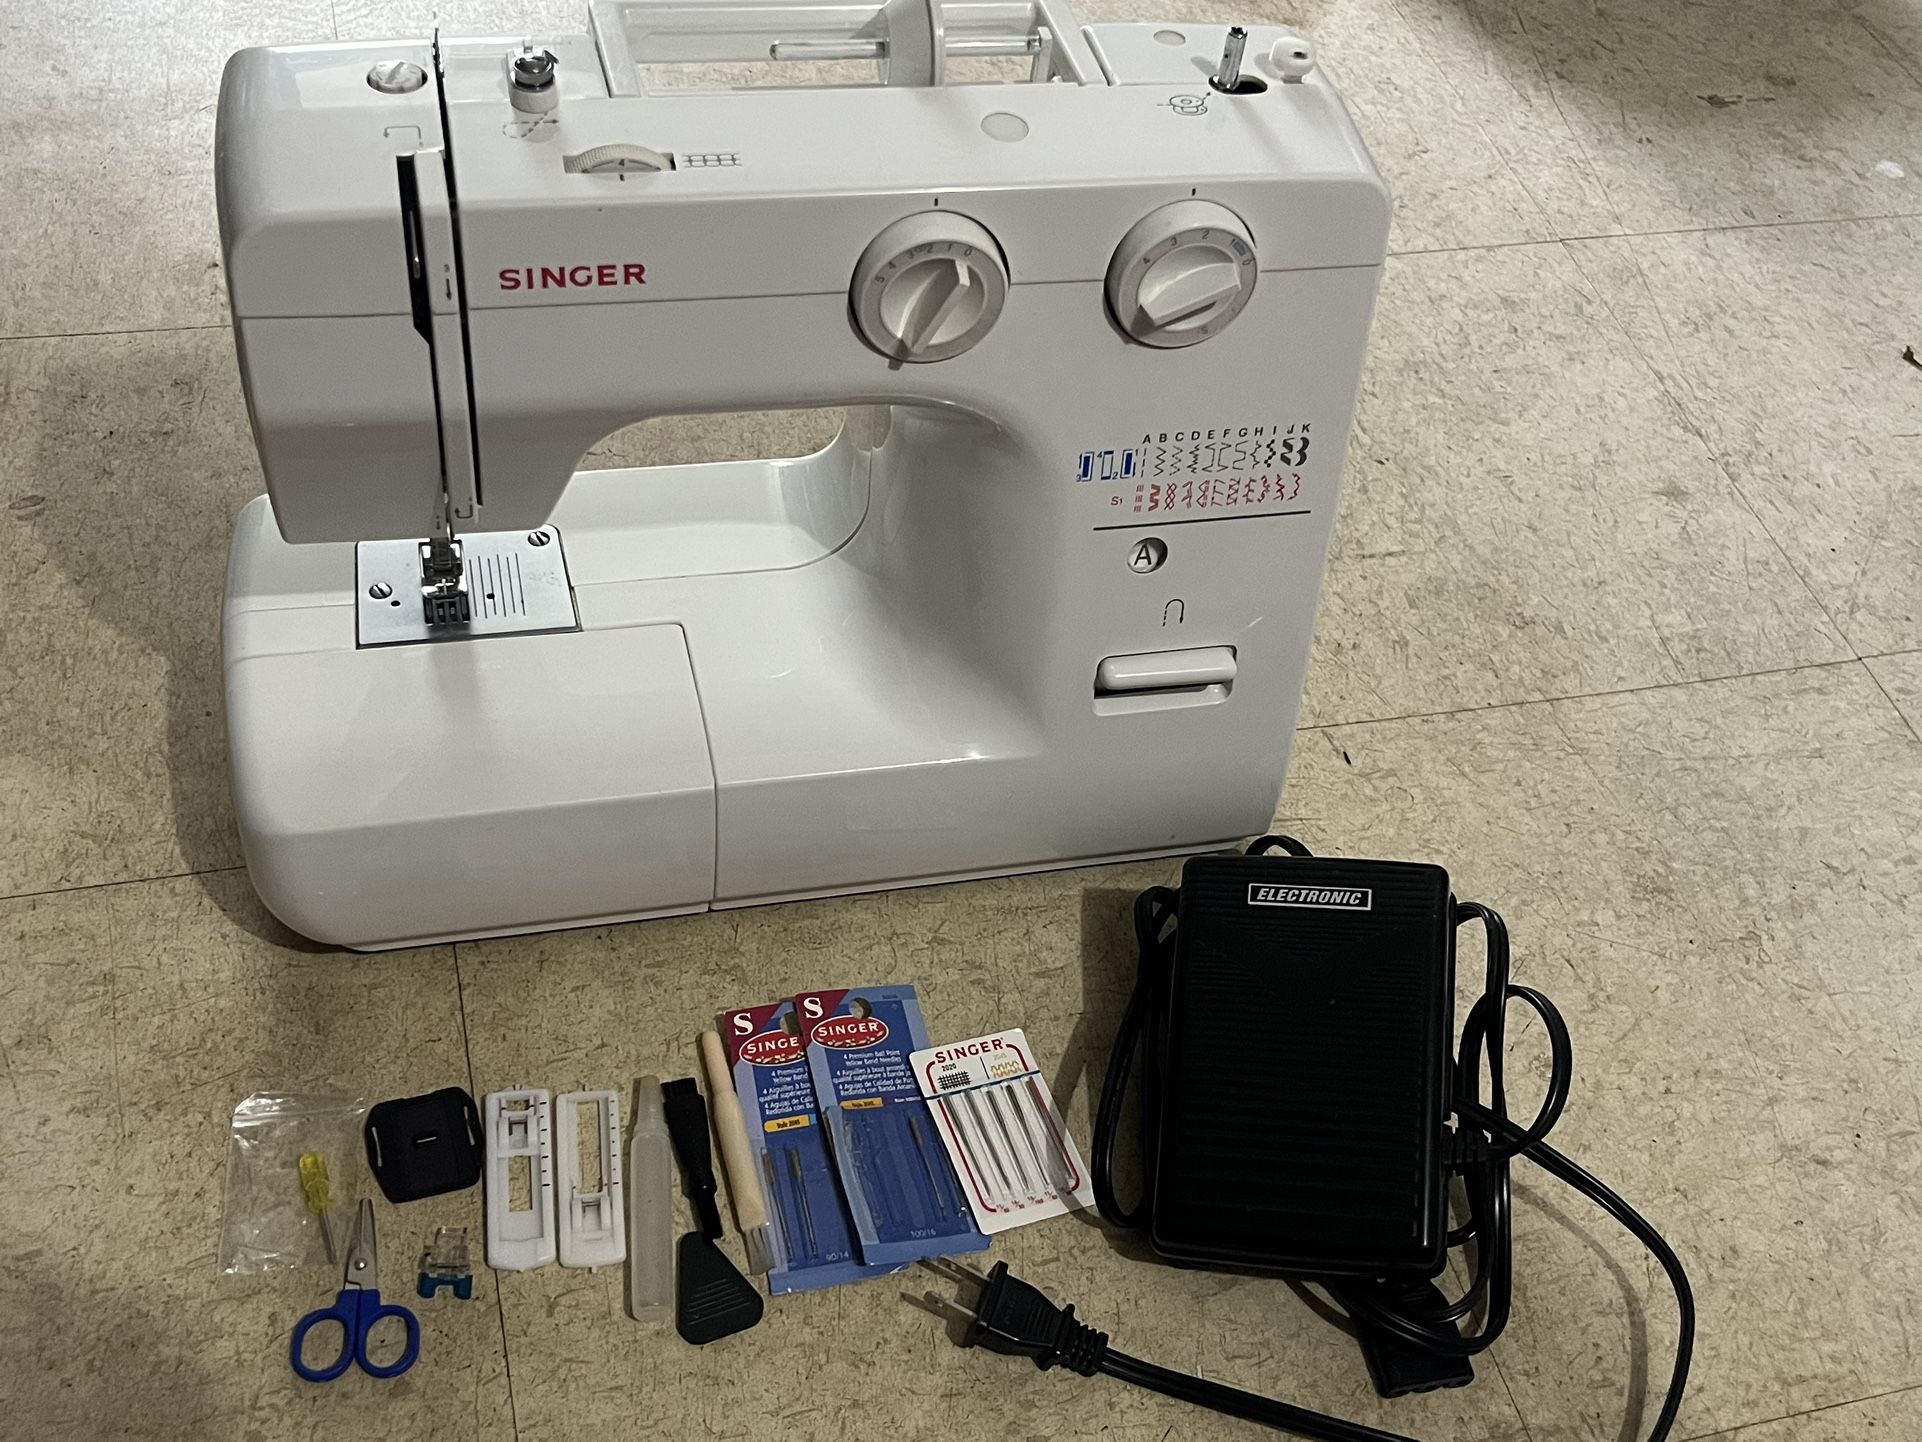 Singer Portable Electric Sewing Machine model 1120 40 stitches